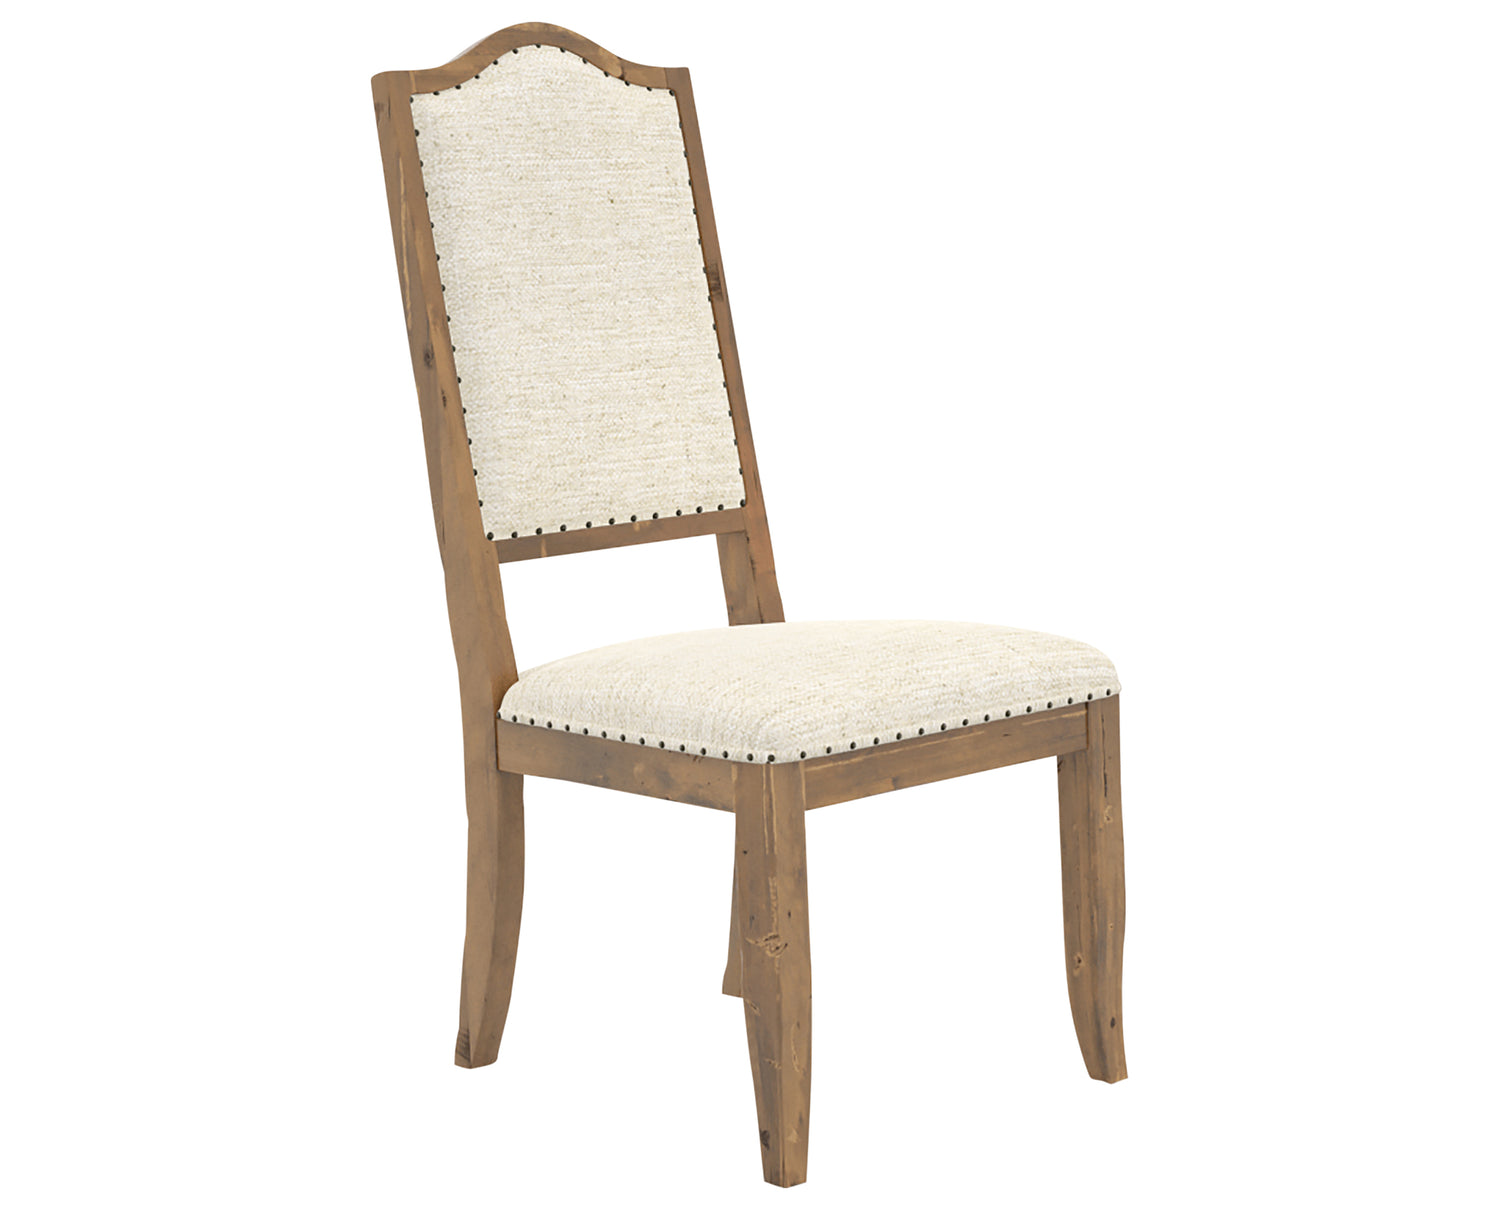 Oak Washed and Fabric TW with Antique Brass Nails | Canadel Champlain Dining Chair 315 | Valley Ridge Furniture